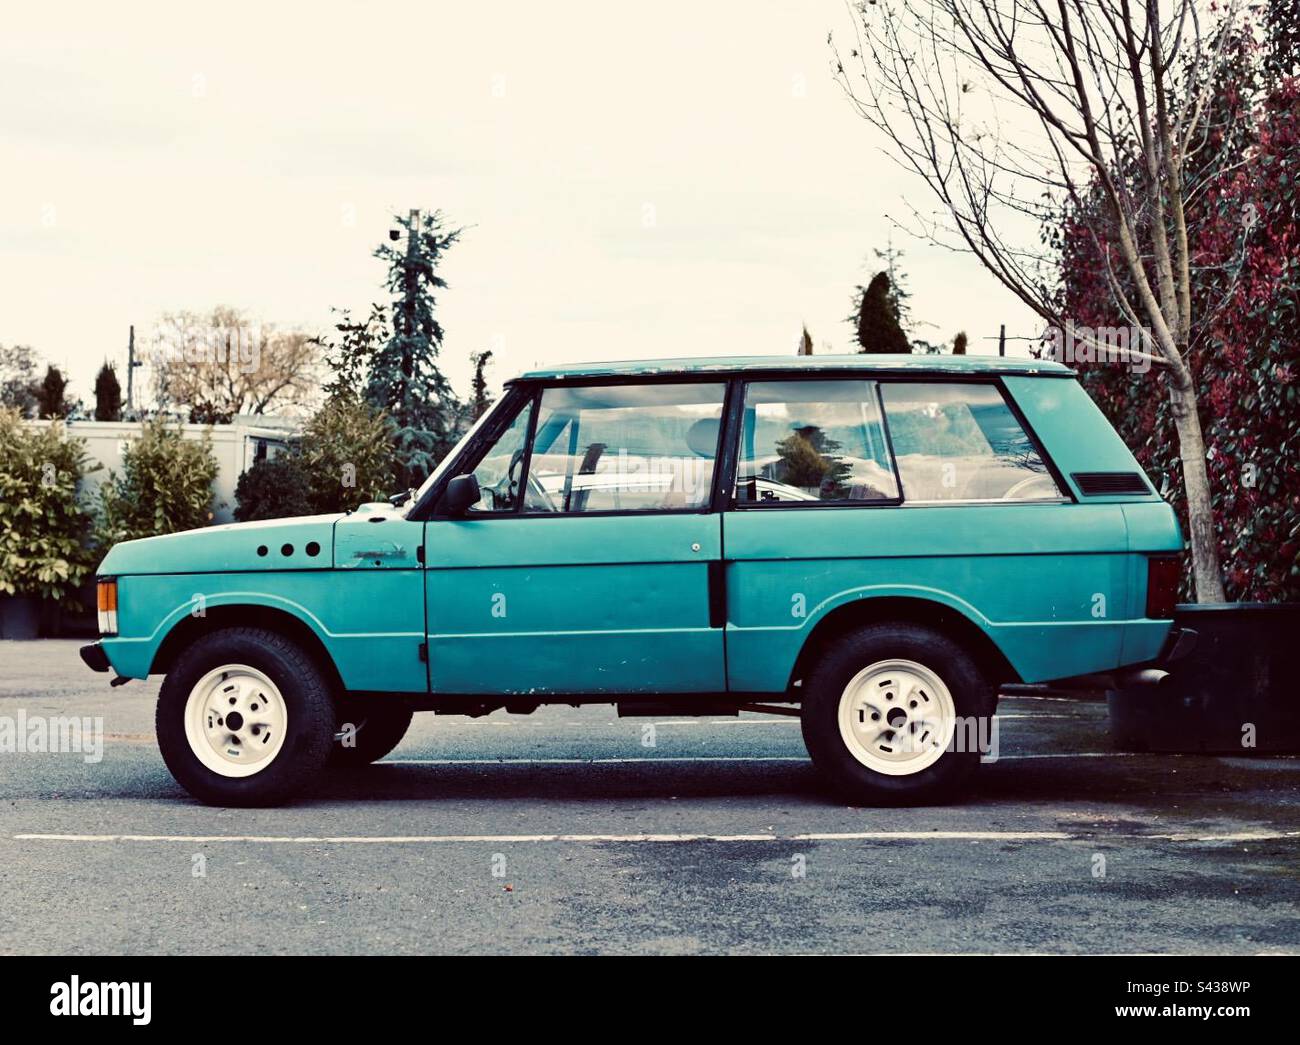 A 2 door Range Rover classic in an unusual blue colour Stock Photo